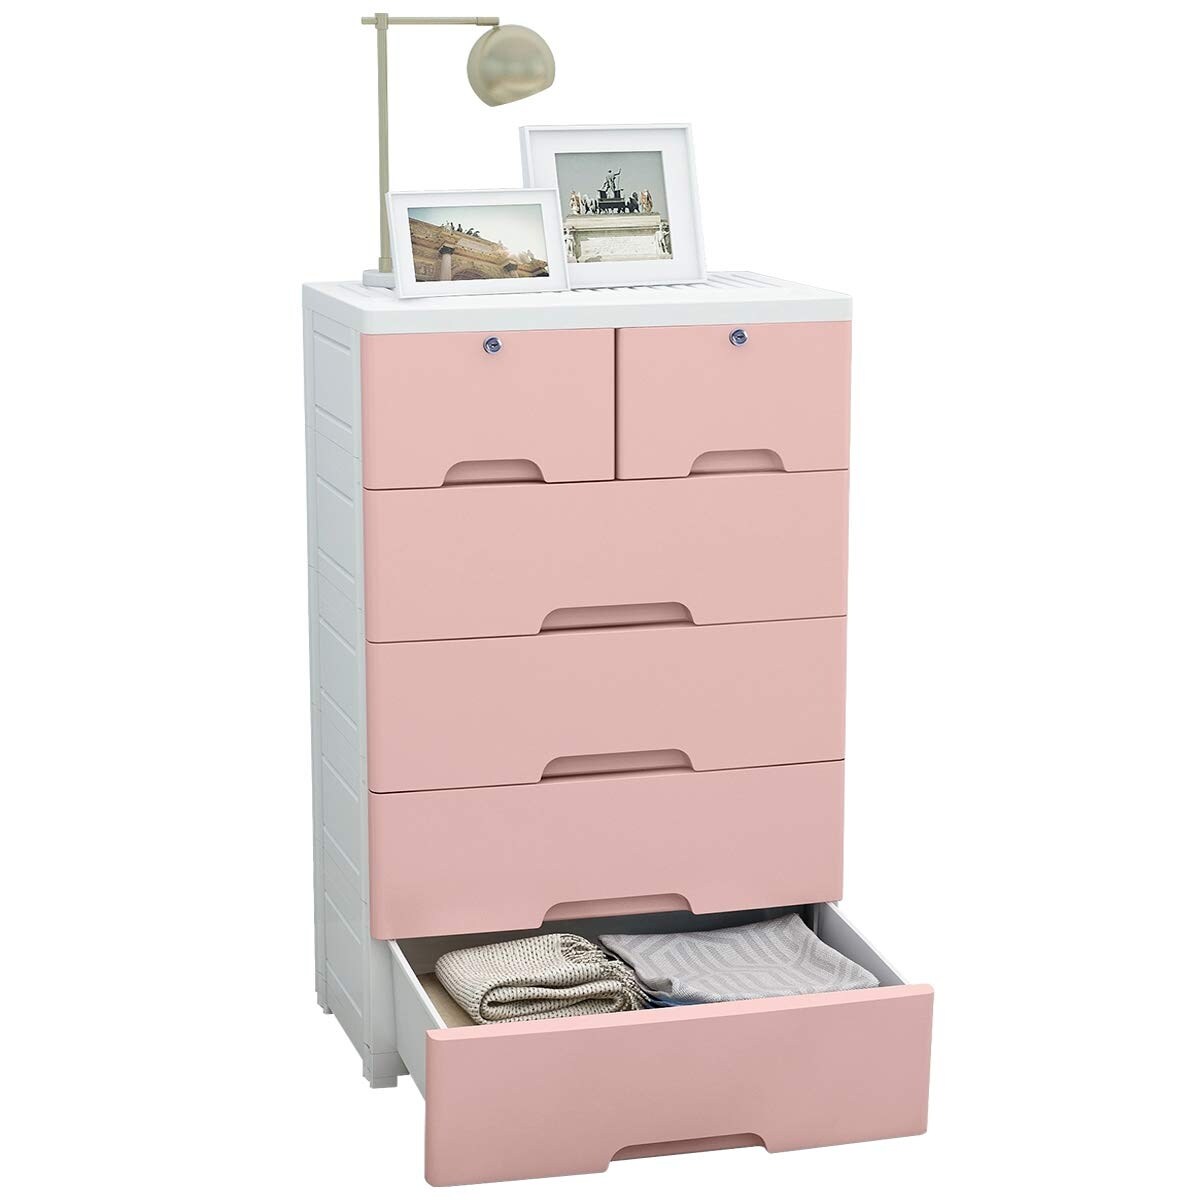 https://ak1.ostkcdn.com/images/products/is/images/direct/057ce3d768808c3eacc7d8d4c18347db3c255d15/Plastic-Drawers-Dresser%2CStorage-Cabinet-with-6-Drawers%2CCloset-Drawers-Tall-Dresser-Organizer-for-Clothes%2CPlayroom.jpg